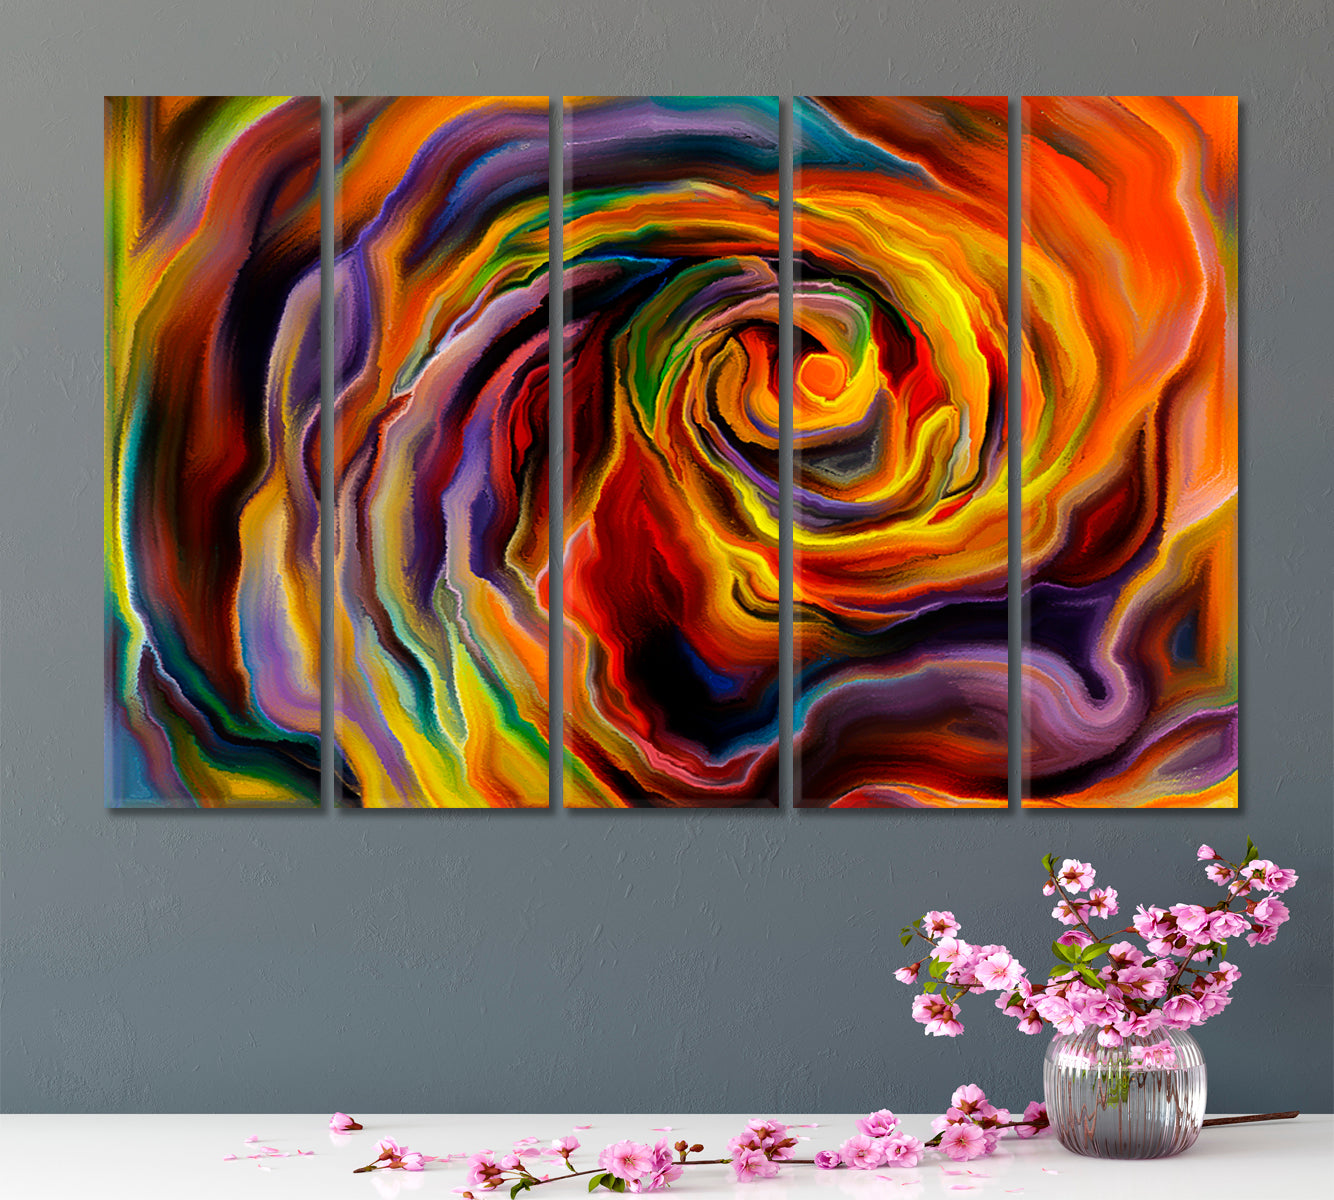 FORMS Magical Abstract Vivid Whirlpool Abstract Art Print Artesty 5 panels 36" x 24" 